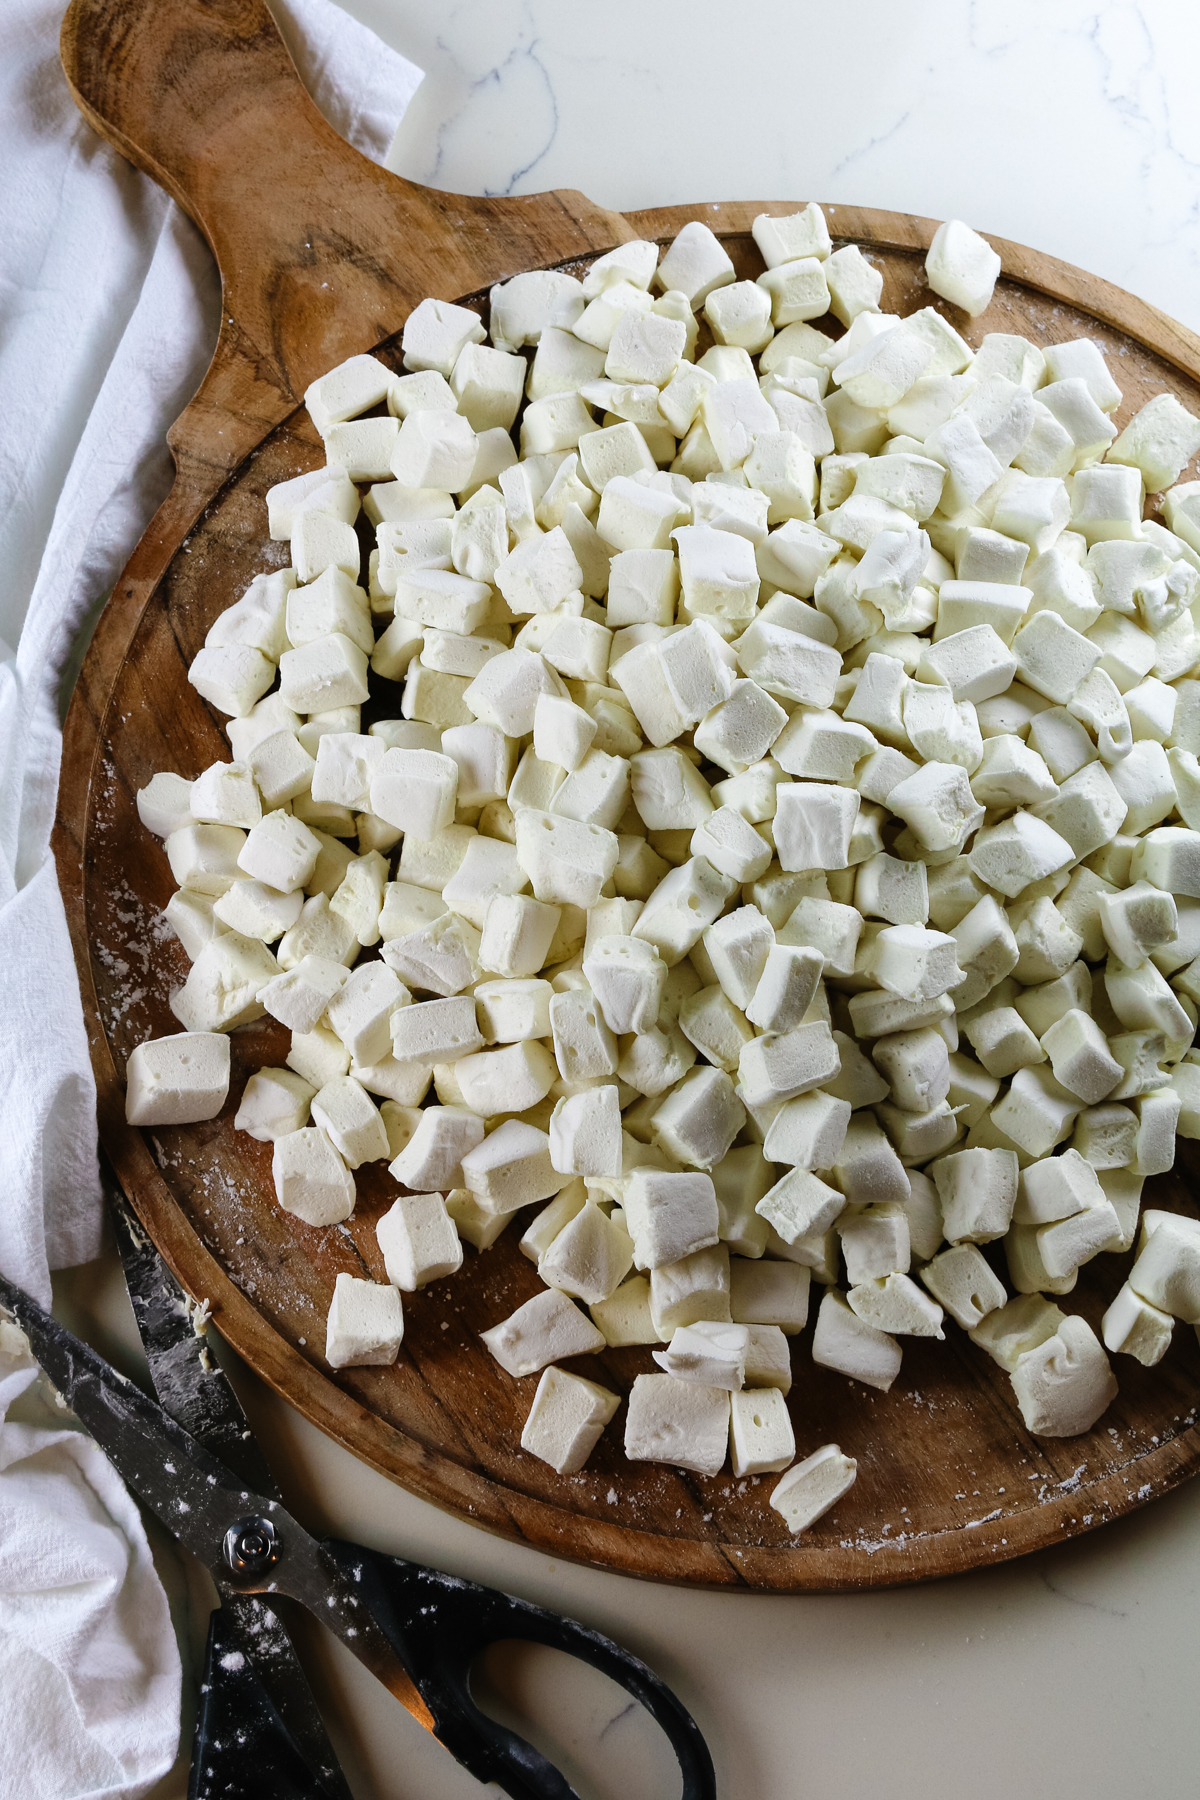 homemade marshmallows cut into bite-size pieces on a circular wooden cutting board and kitchen shears to the side.